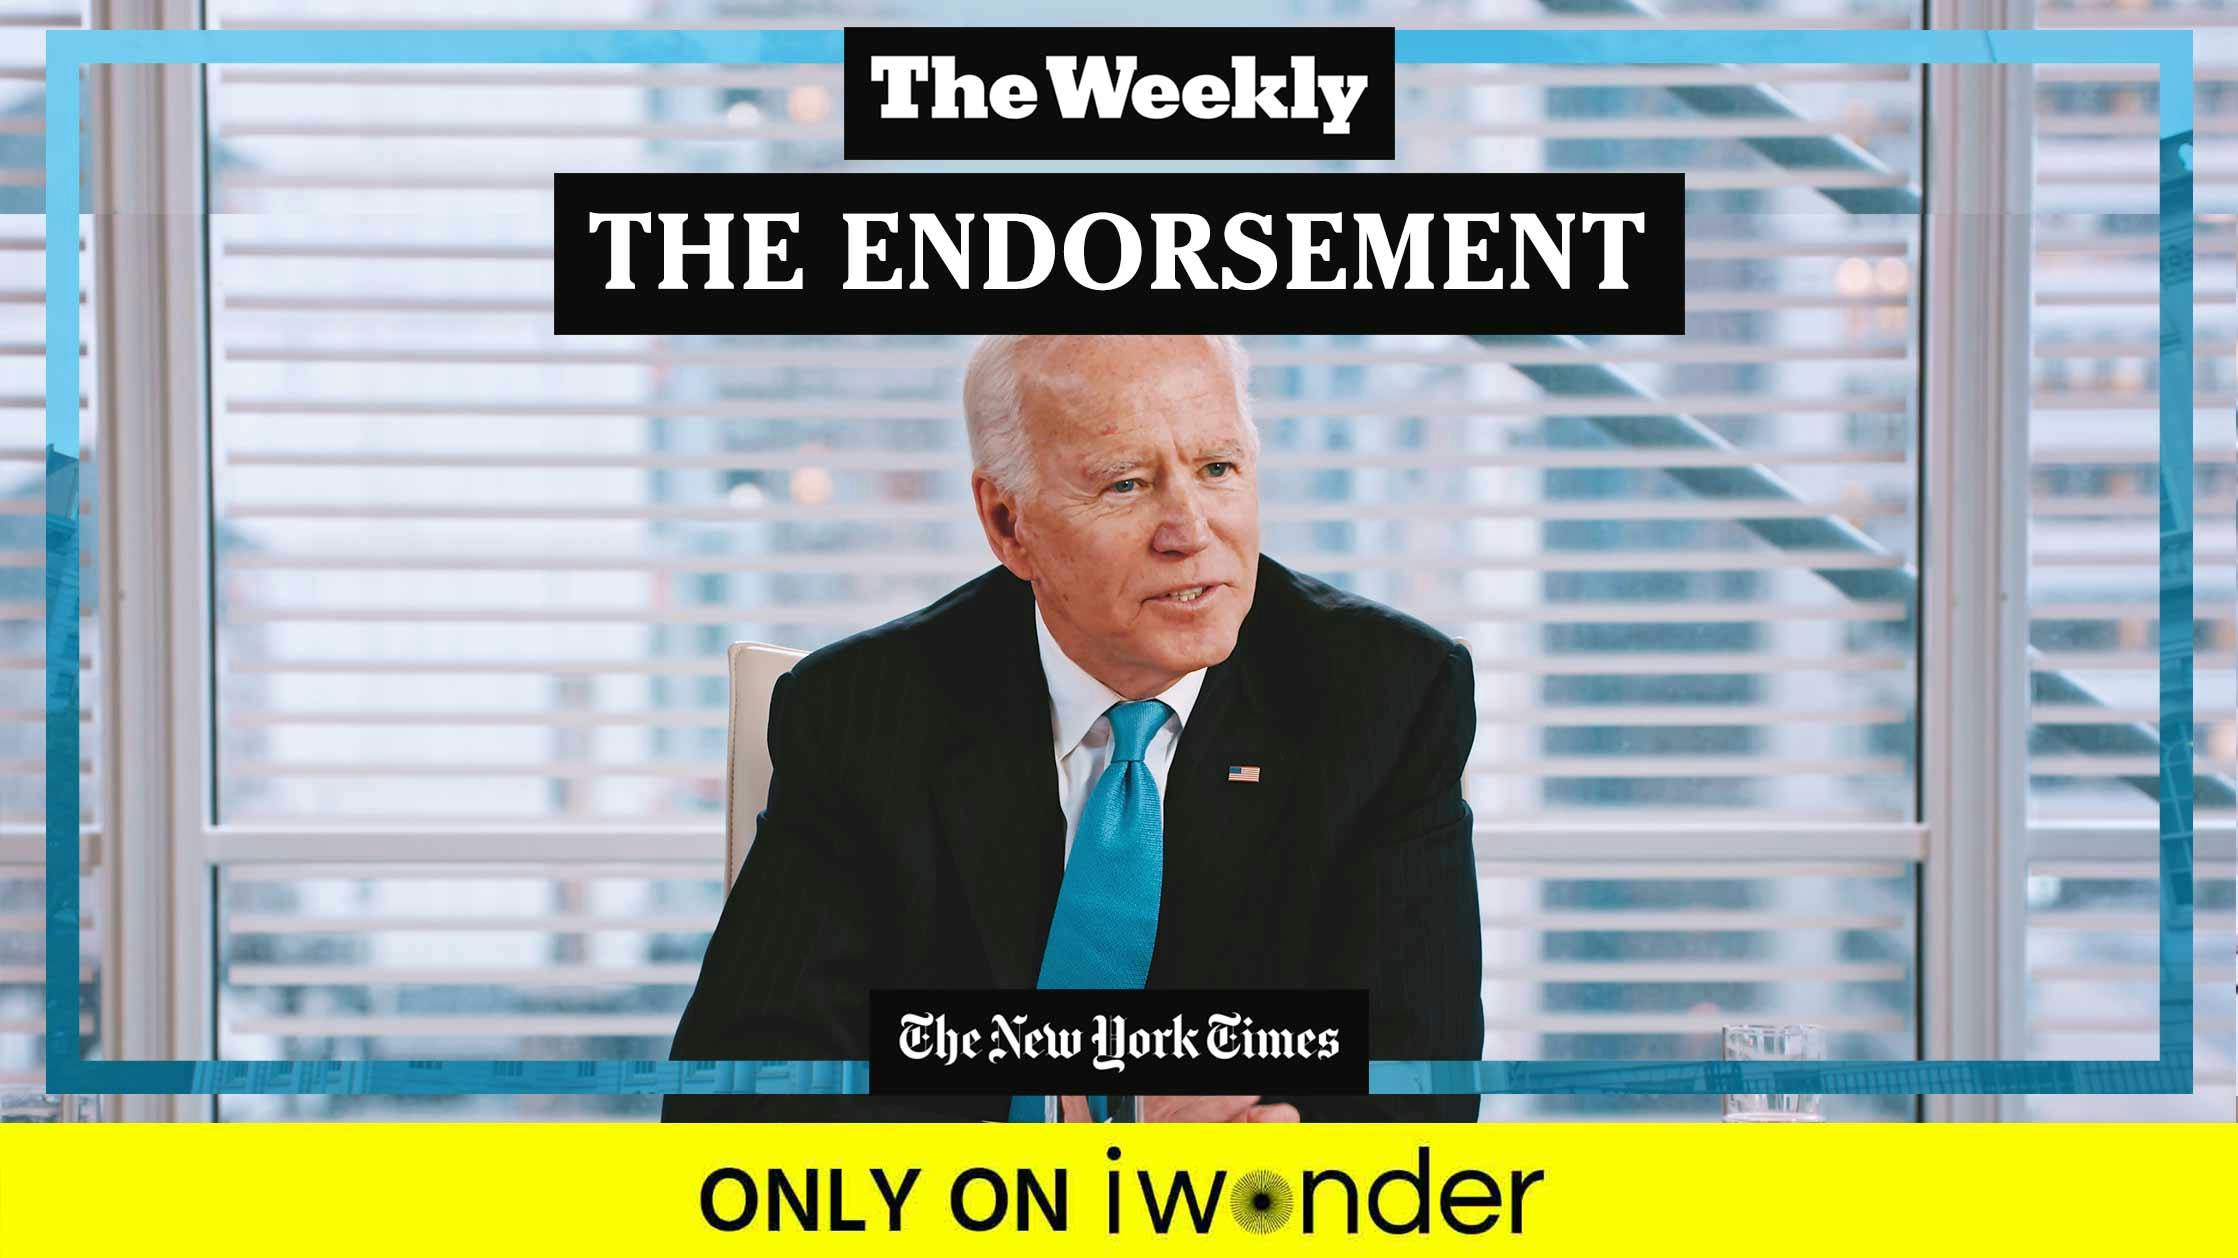 The Weekly: The Endorsement